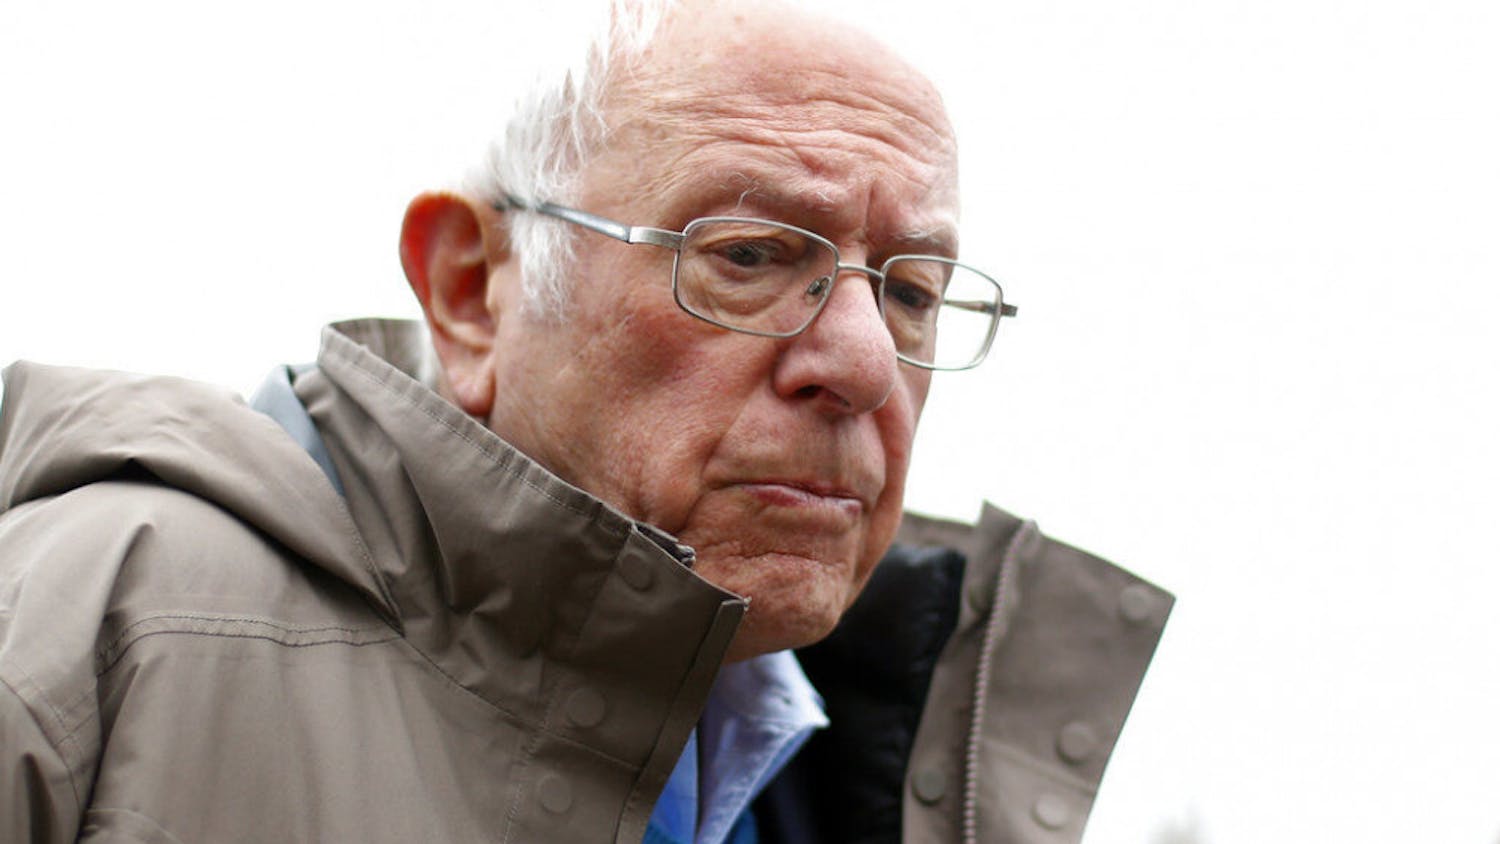 FILE - In this March 10, 2020, file photo Democratic presidential candidate Sen. Bernie Sanders, I-Vt., visits outside a polling location at Warren E. Bow Elementary School in Detroit. (AP Photo/Paul Sancya, File)